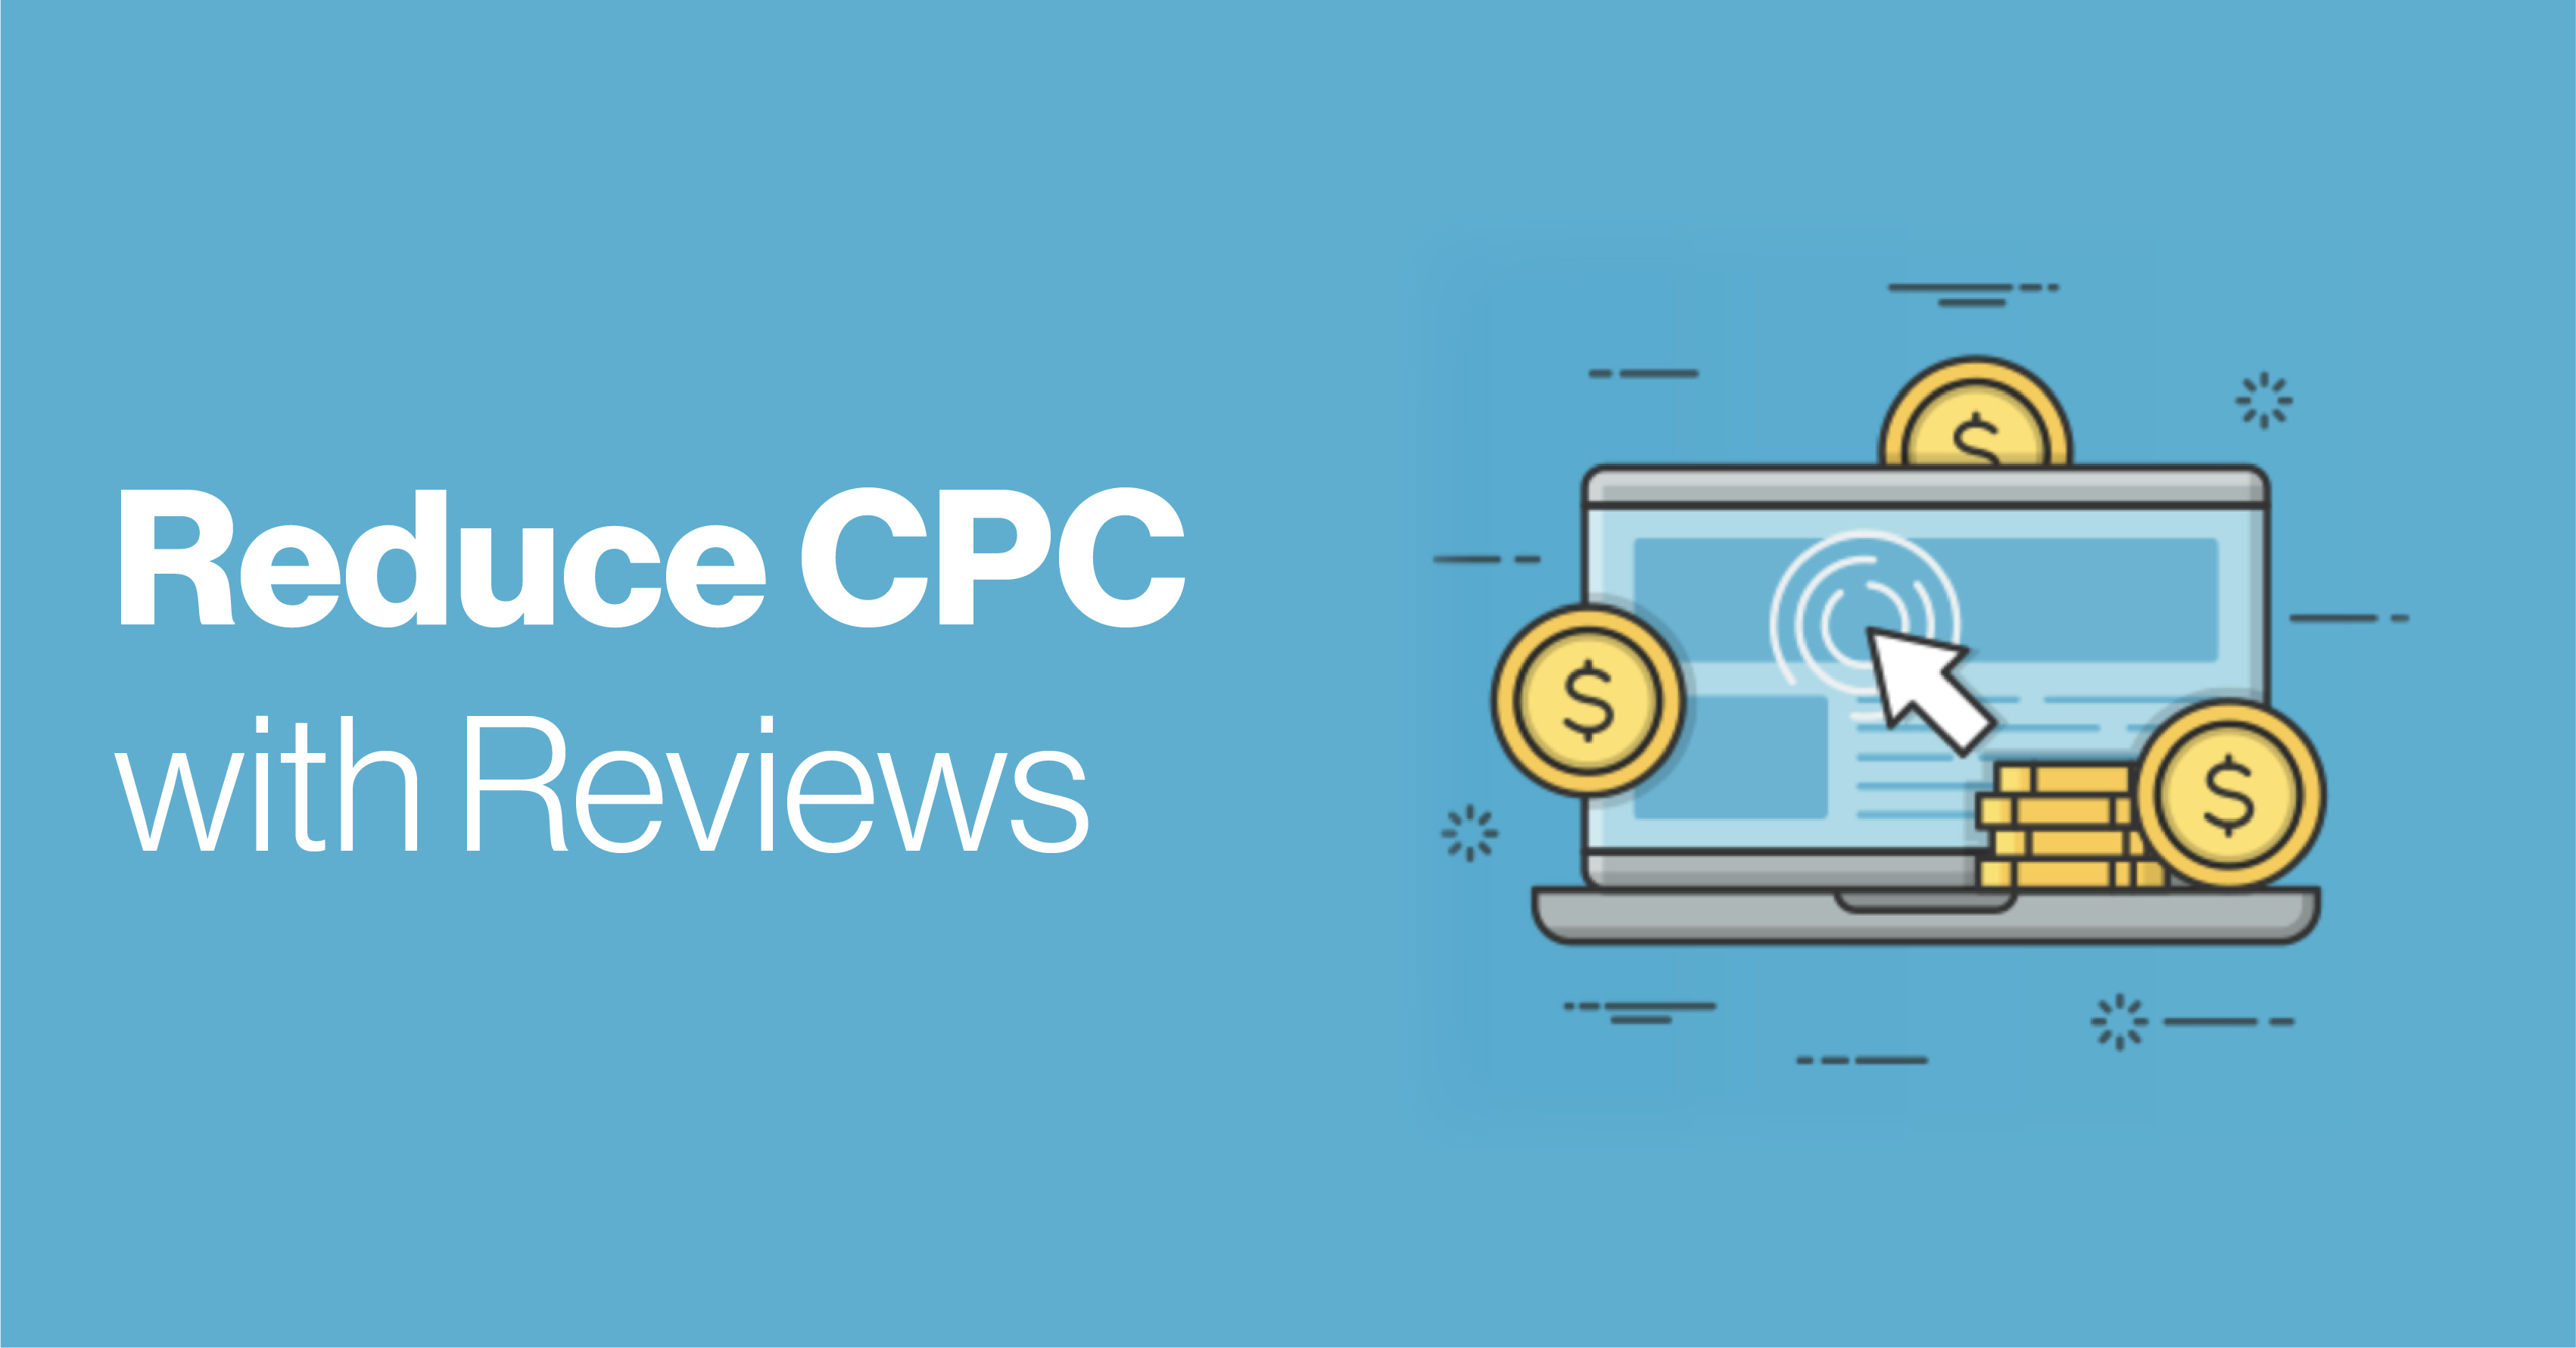 How to Reduce Cost Per Click in Adwords - Using Reviews